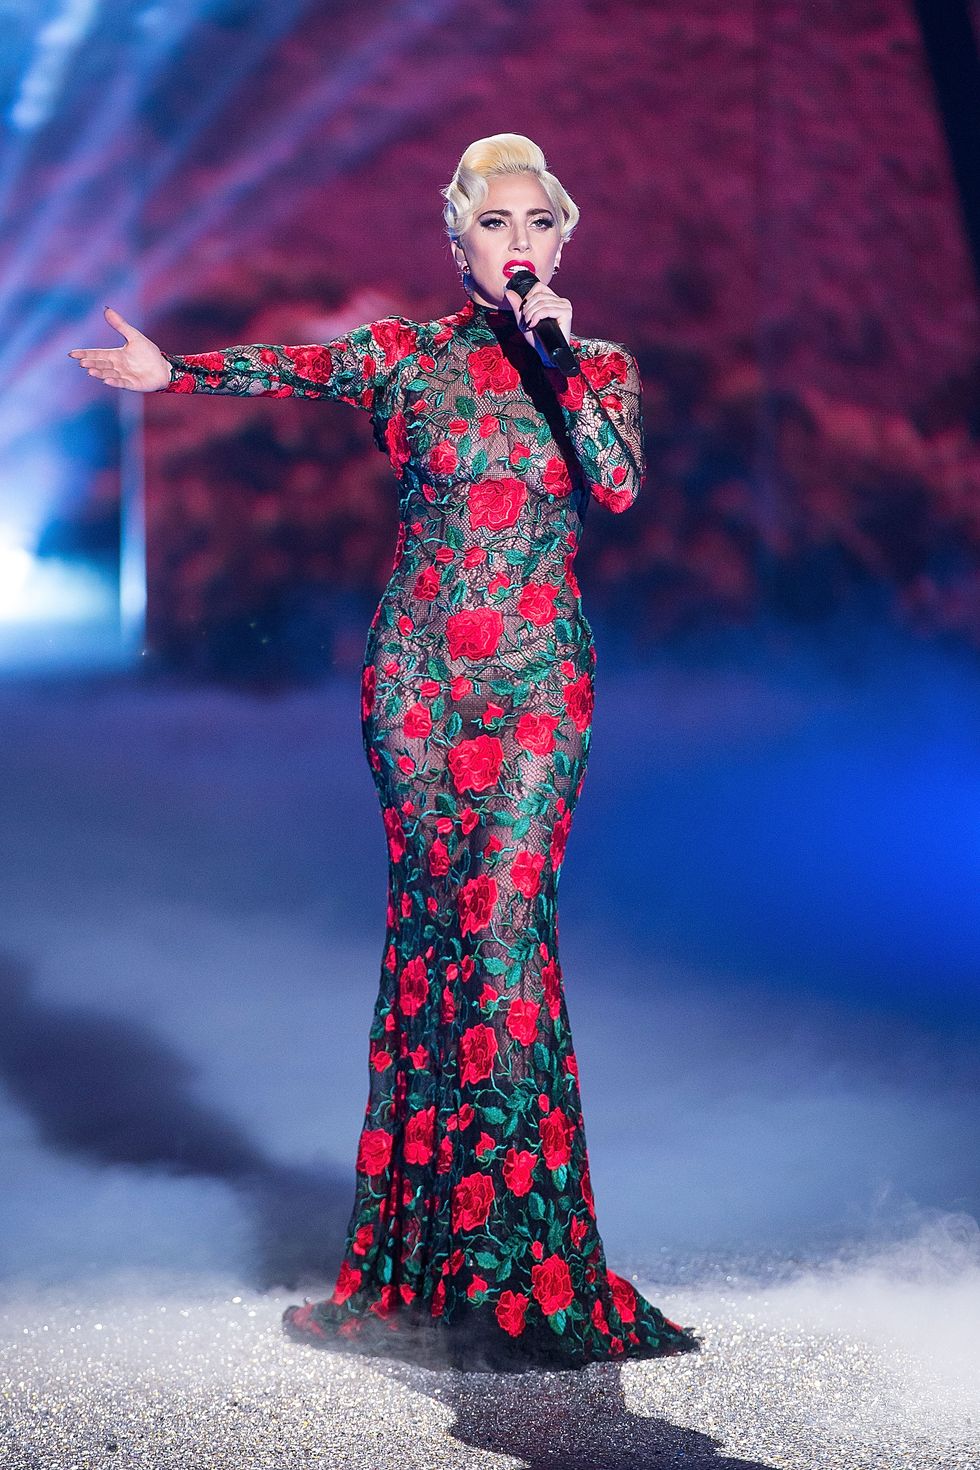 Microphone, Dress, Formal wear, Stage, Fashion, Performance, Electric blue, Artist, Music artist, Singing, 